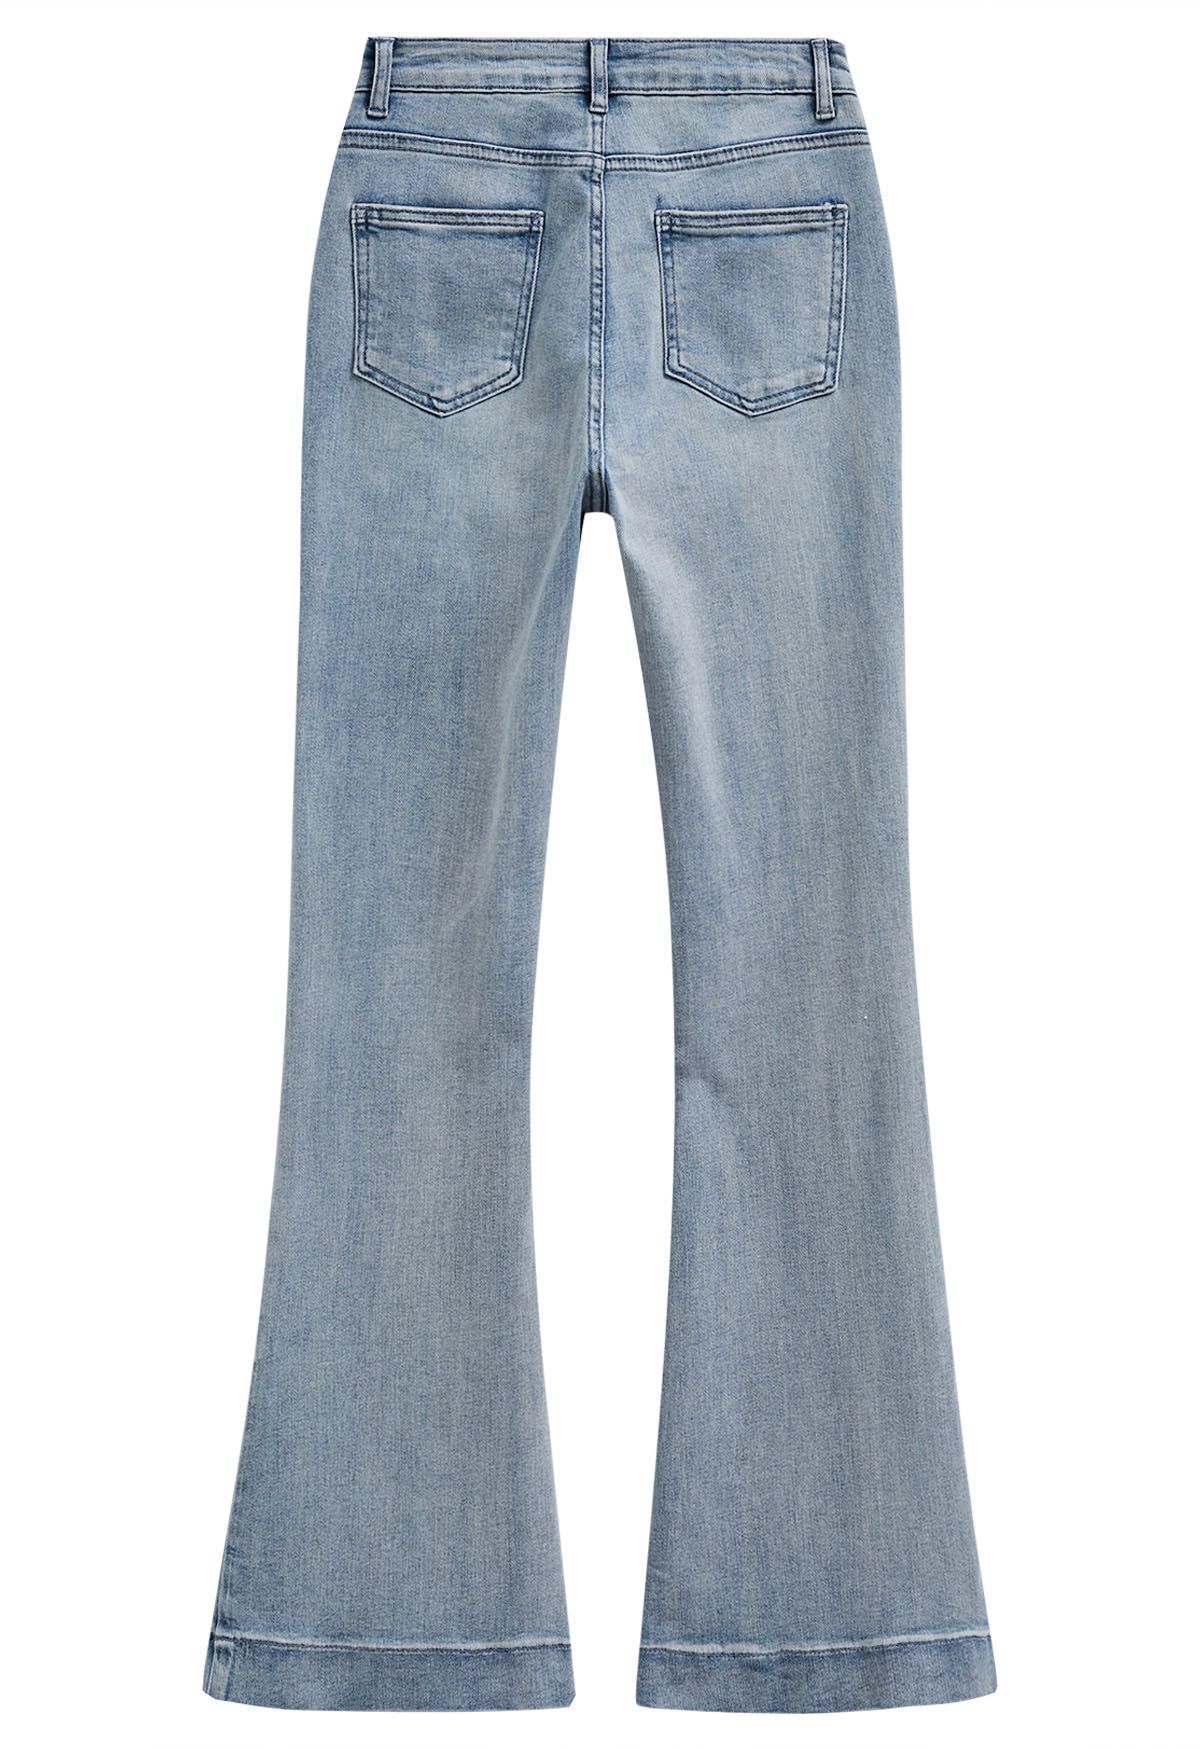 On-Trend High Waist Flare Leg Jeans in Blue